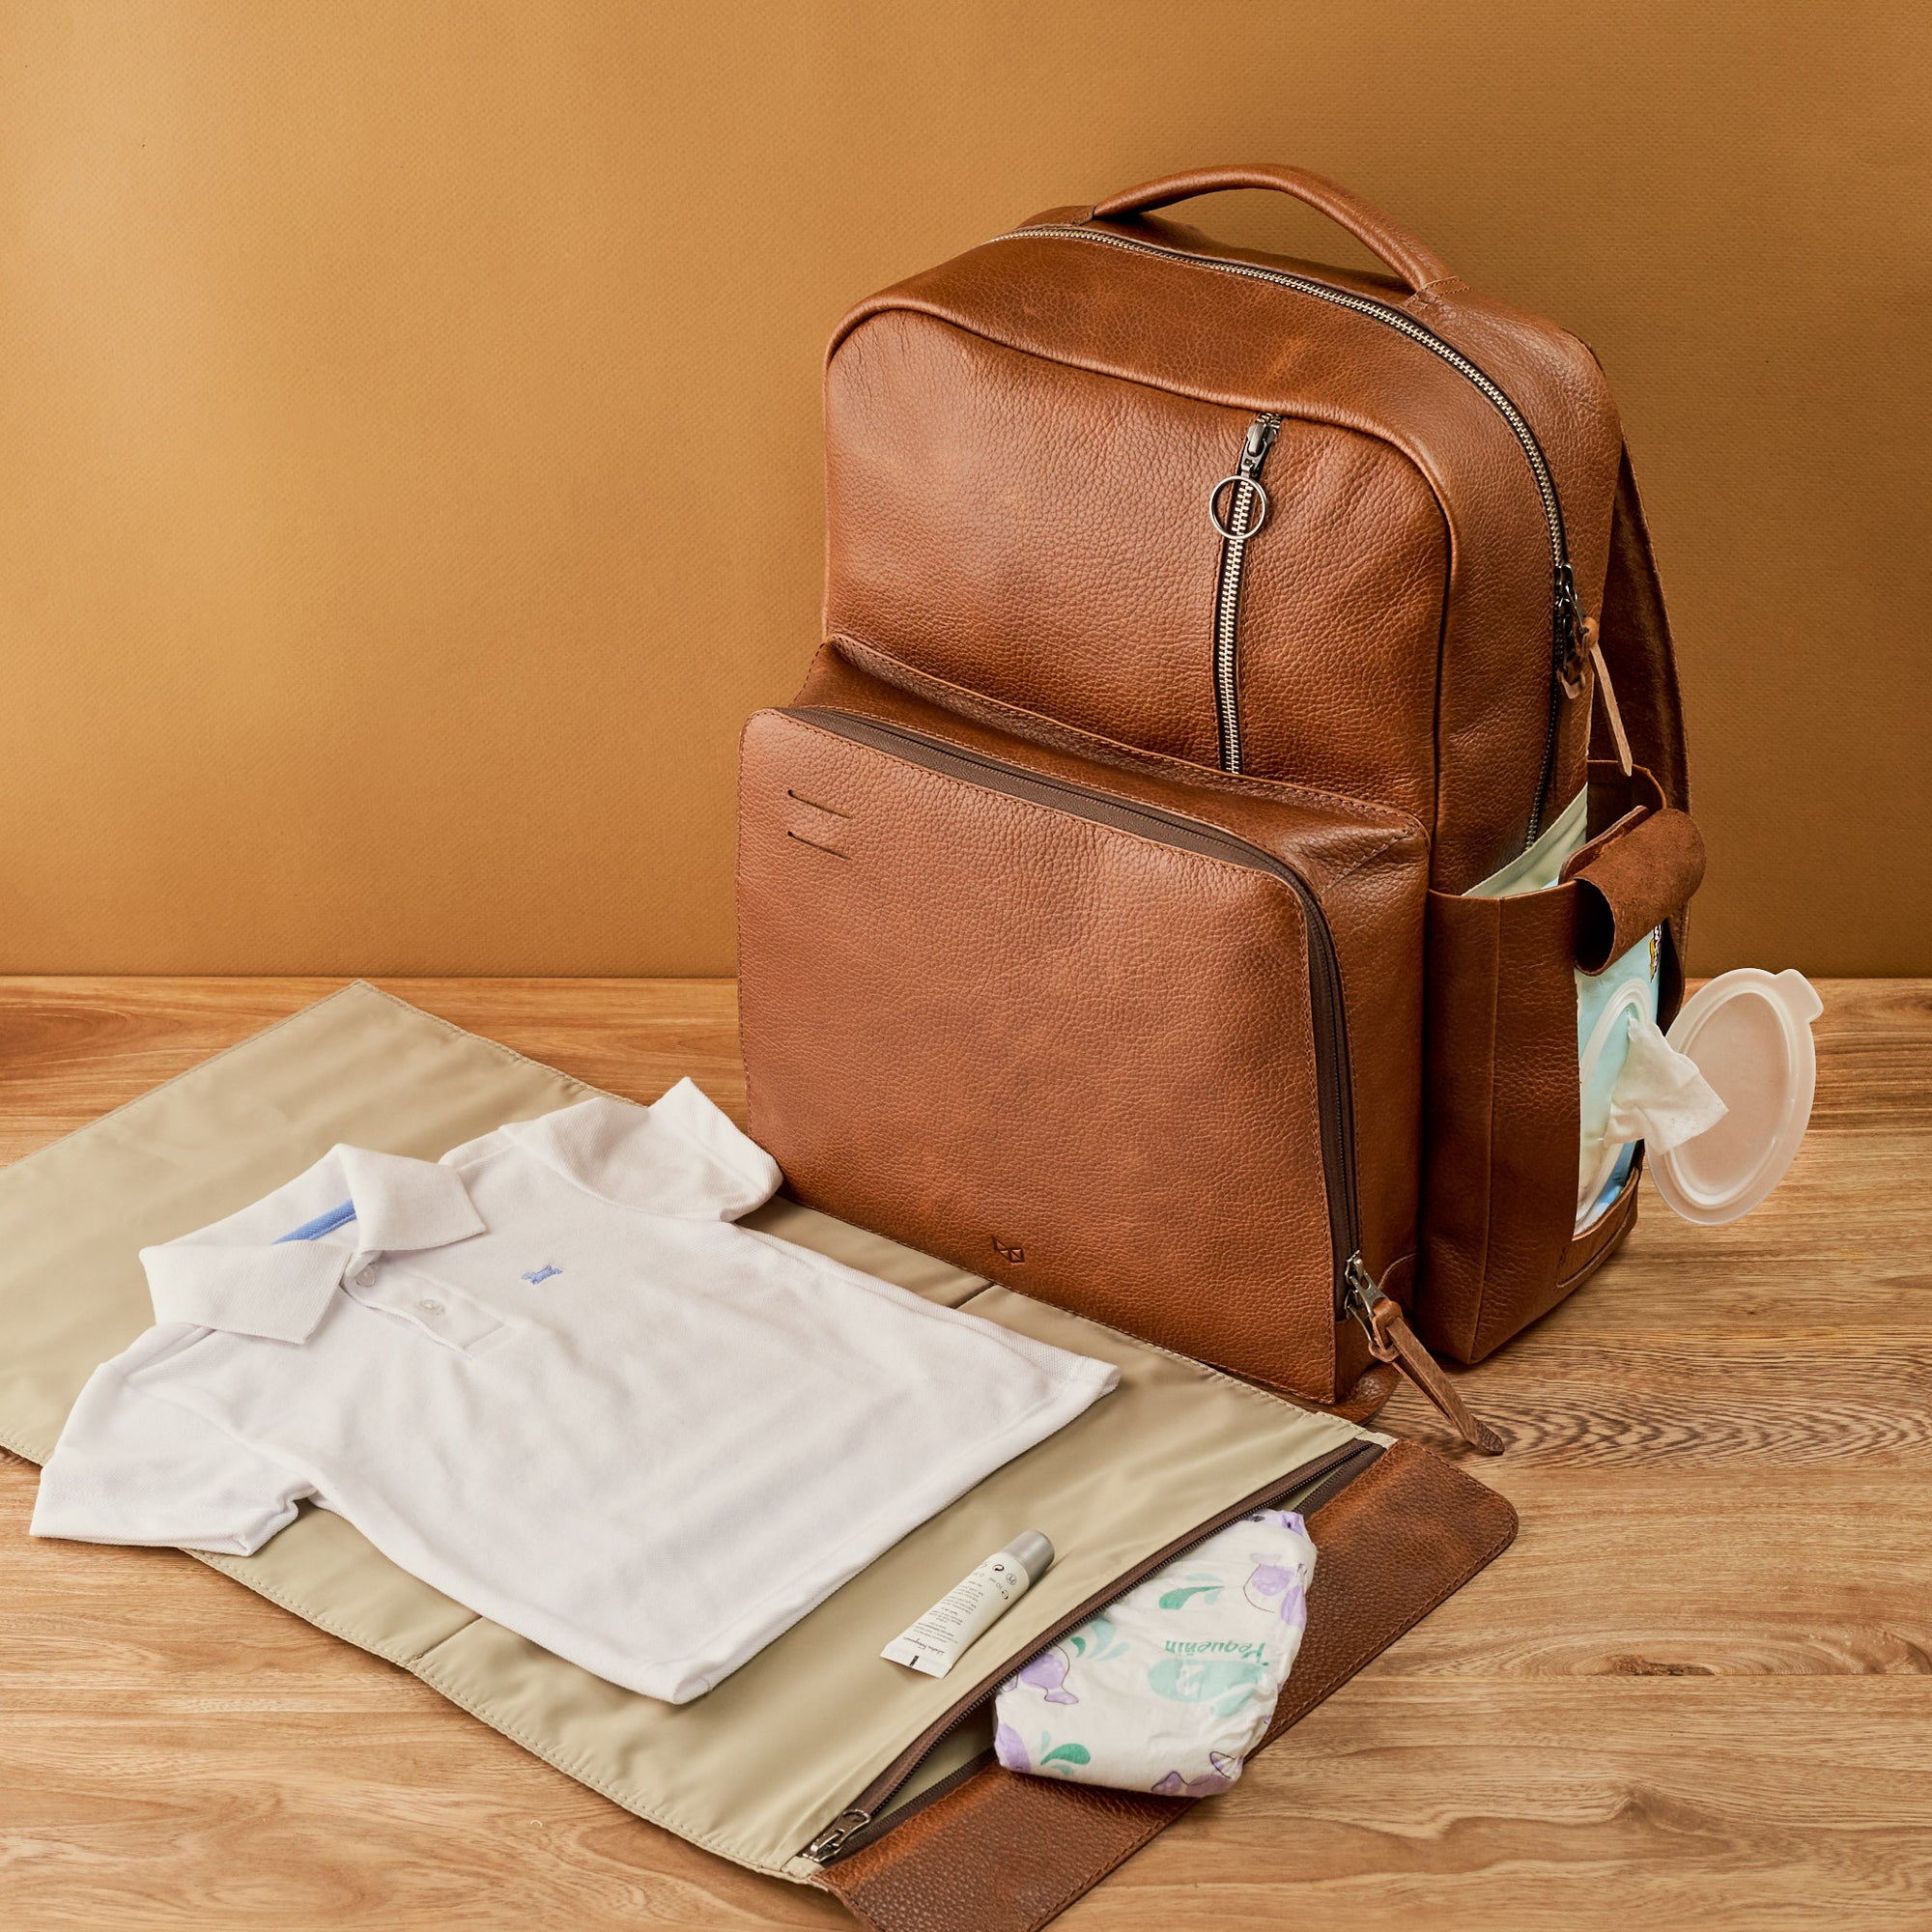 Tan Diaper Bag Backpack for New Dads by capra Leather